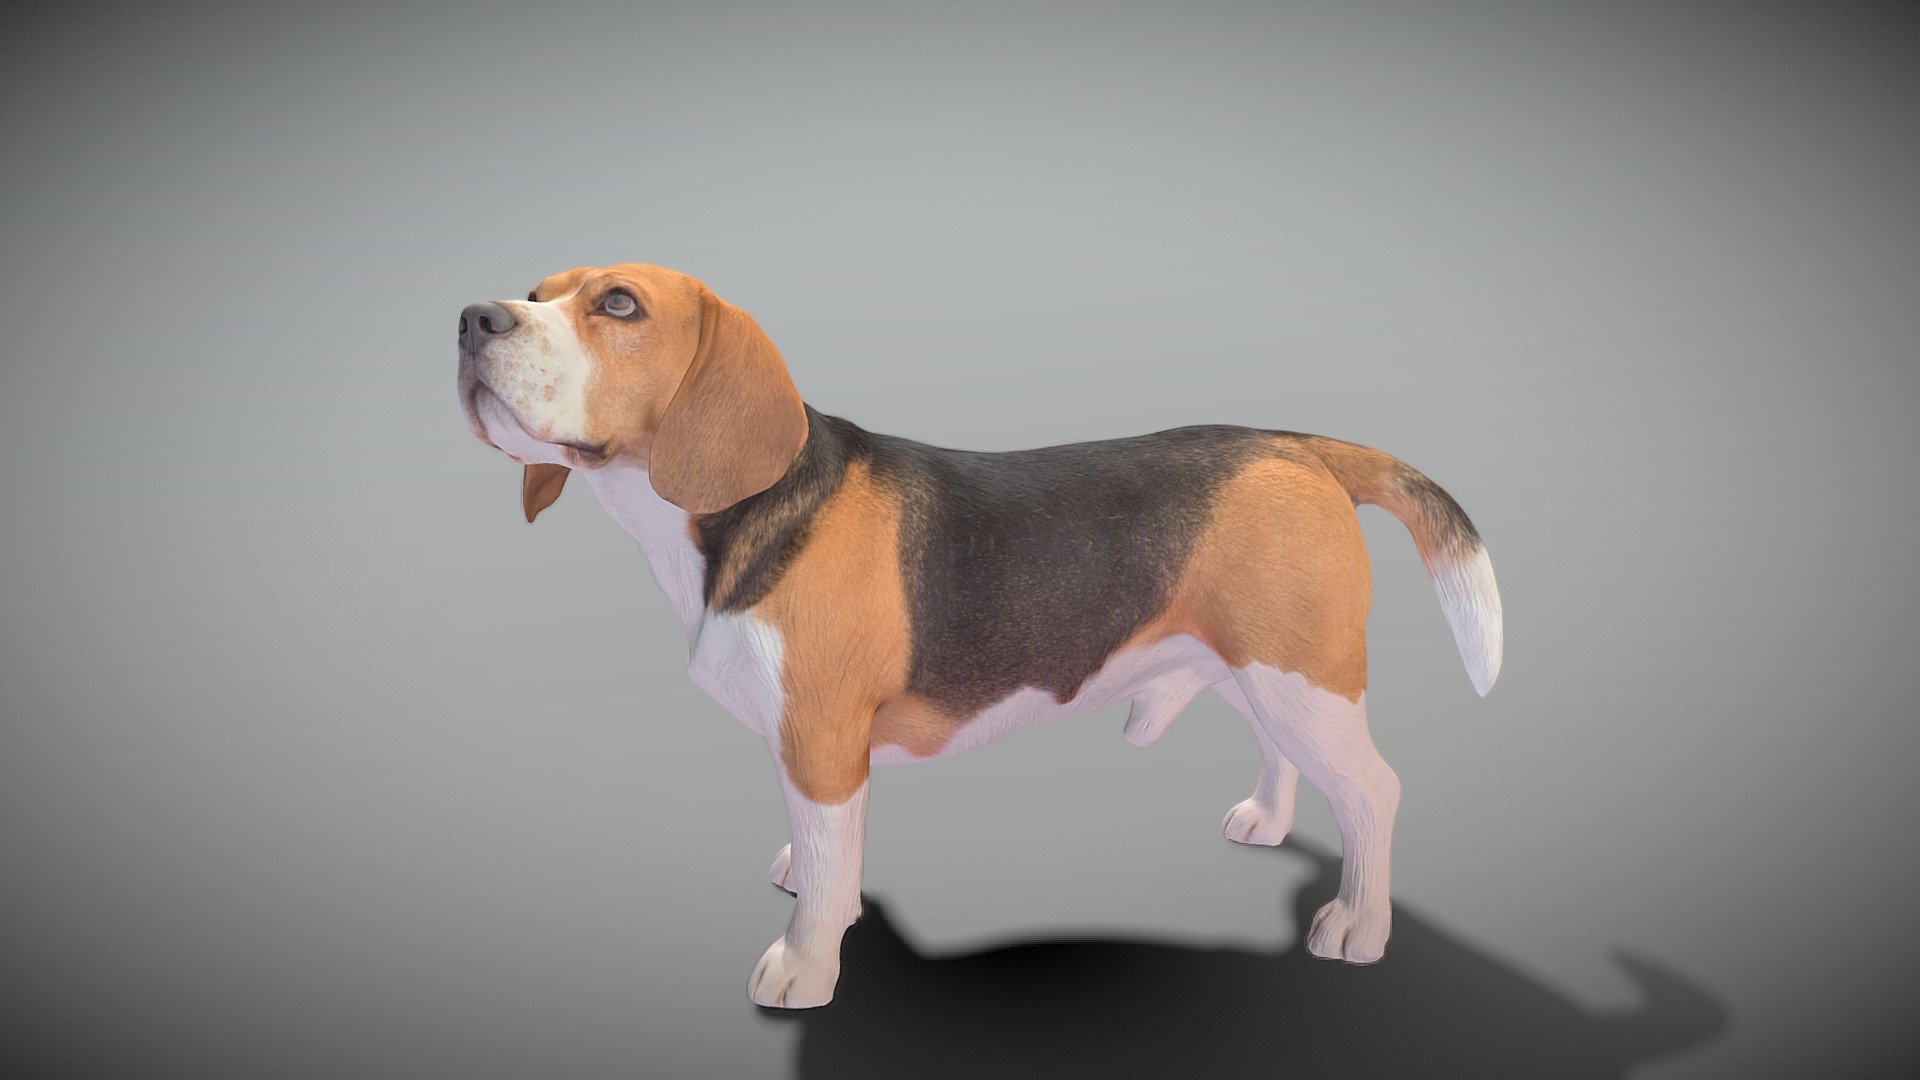 This is a true sized and highly detailed model of a young charming Beagle dog. It will add life and coziness to any architectural visualisation of houses, playgrounds, parques, urban landscapes, etc.

The product is ready both for immediate use in architectural visualisations, or further render and detailed sculpting in Zbrush.

Technical specifications:




digital double 3d scan model

150k &amp; 30k triangles | double triangulated

high-poly model (.ztl tool with 4-5 subdivisions) clean and retopologized automatically via ZRemesher

sufficiently clean

PBR textures 8K resolution: Diffuse, Normal, Specular maps

non-overlapping UV map

no extra plugins are required for this model

Download package includes a Cinema 4D project file with Redshift shader, OBJ, FBX, STL files, which are applicable for 3ds Max, Maya, Unreal Engine, Unity, Blender, etc. All the textures you will find in the “Tex” folder, included into the main archive.

3D EVERYTHING

Stand with Ukraine! - Walking dog 27 - Buy Royalty Free 3D model by deep3dstudio 3d model